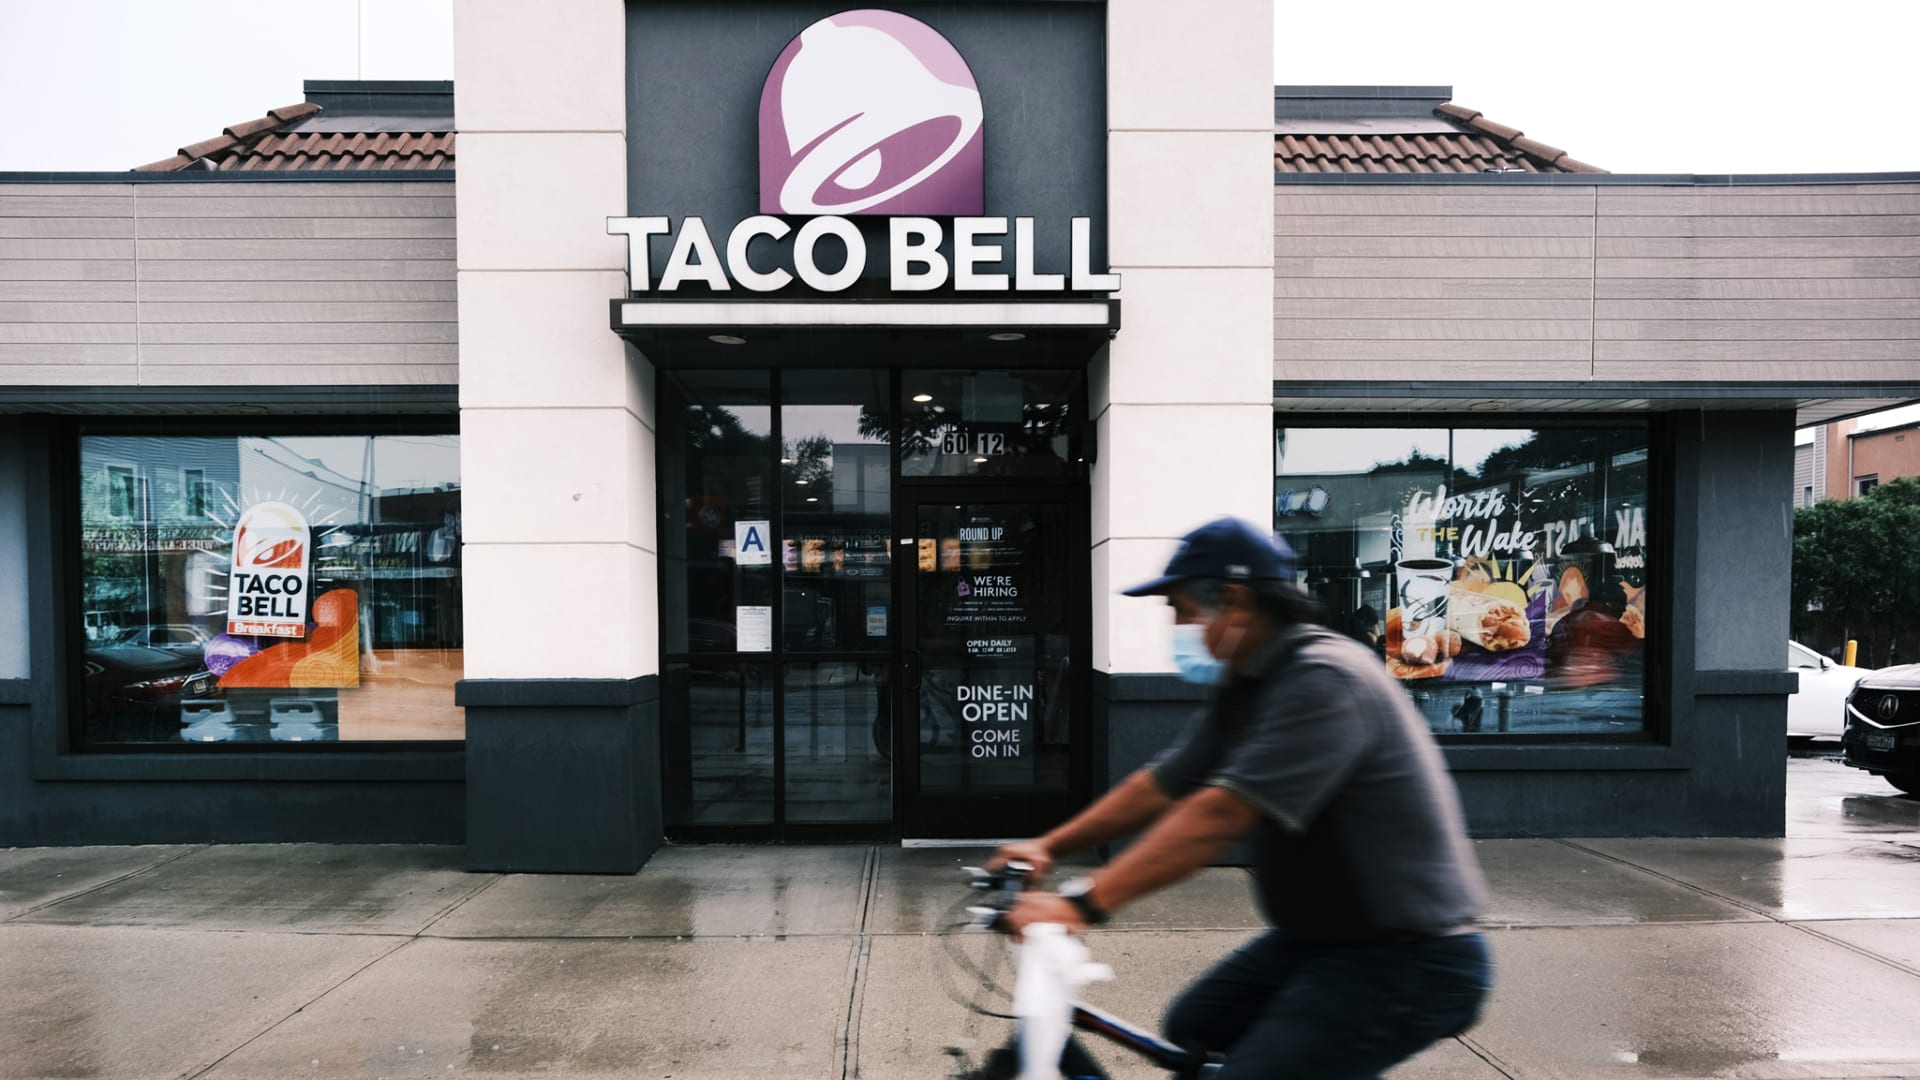 Taco Bell Just Announced a Really Strange Idea. Should Your Business Copy It? (Answer These 5 Questions to Decide)